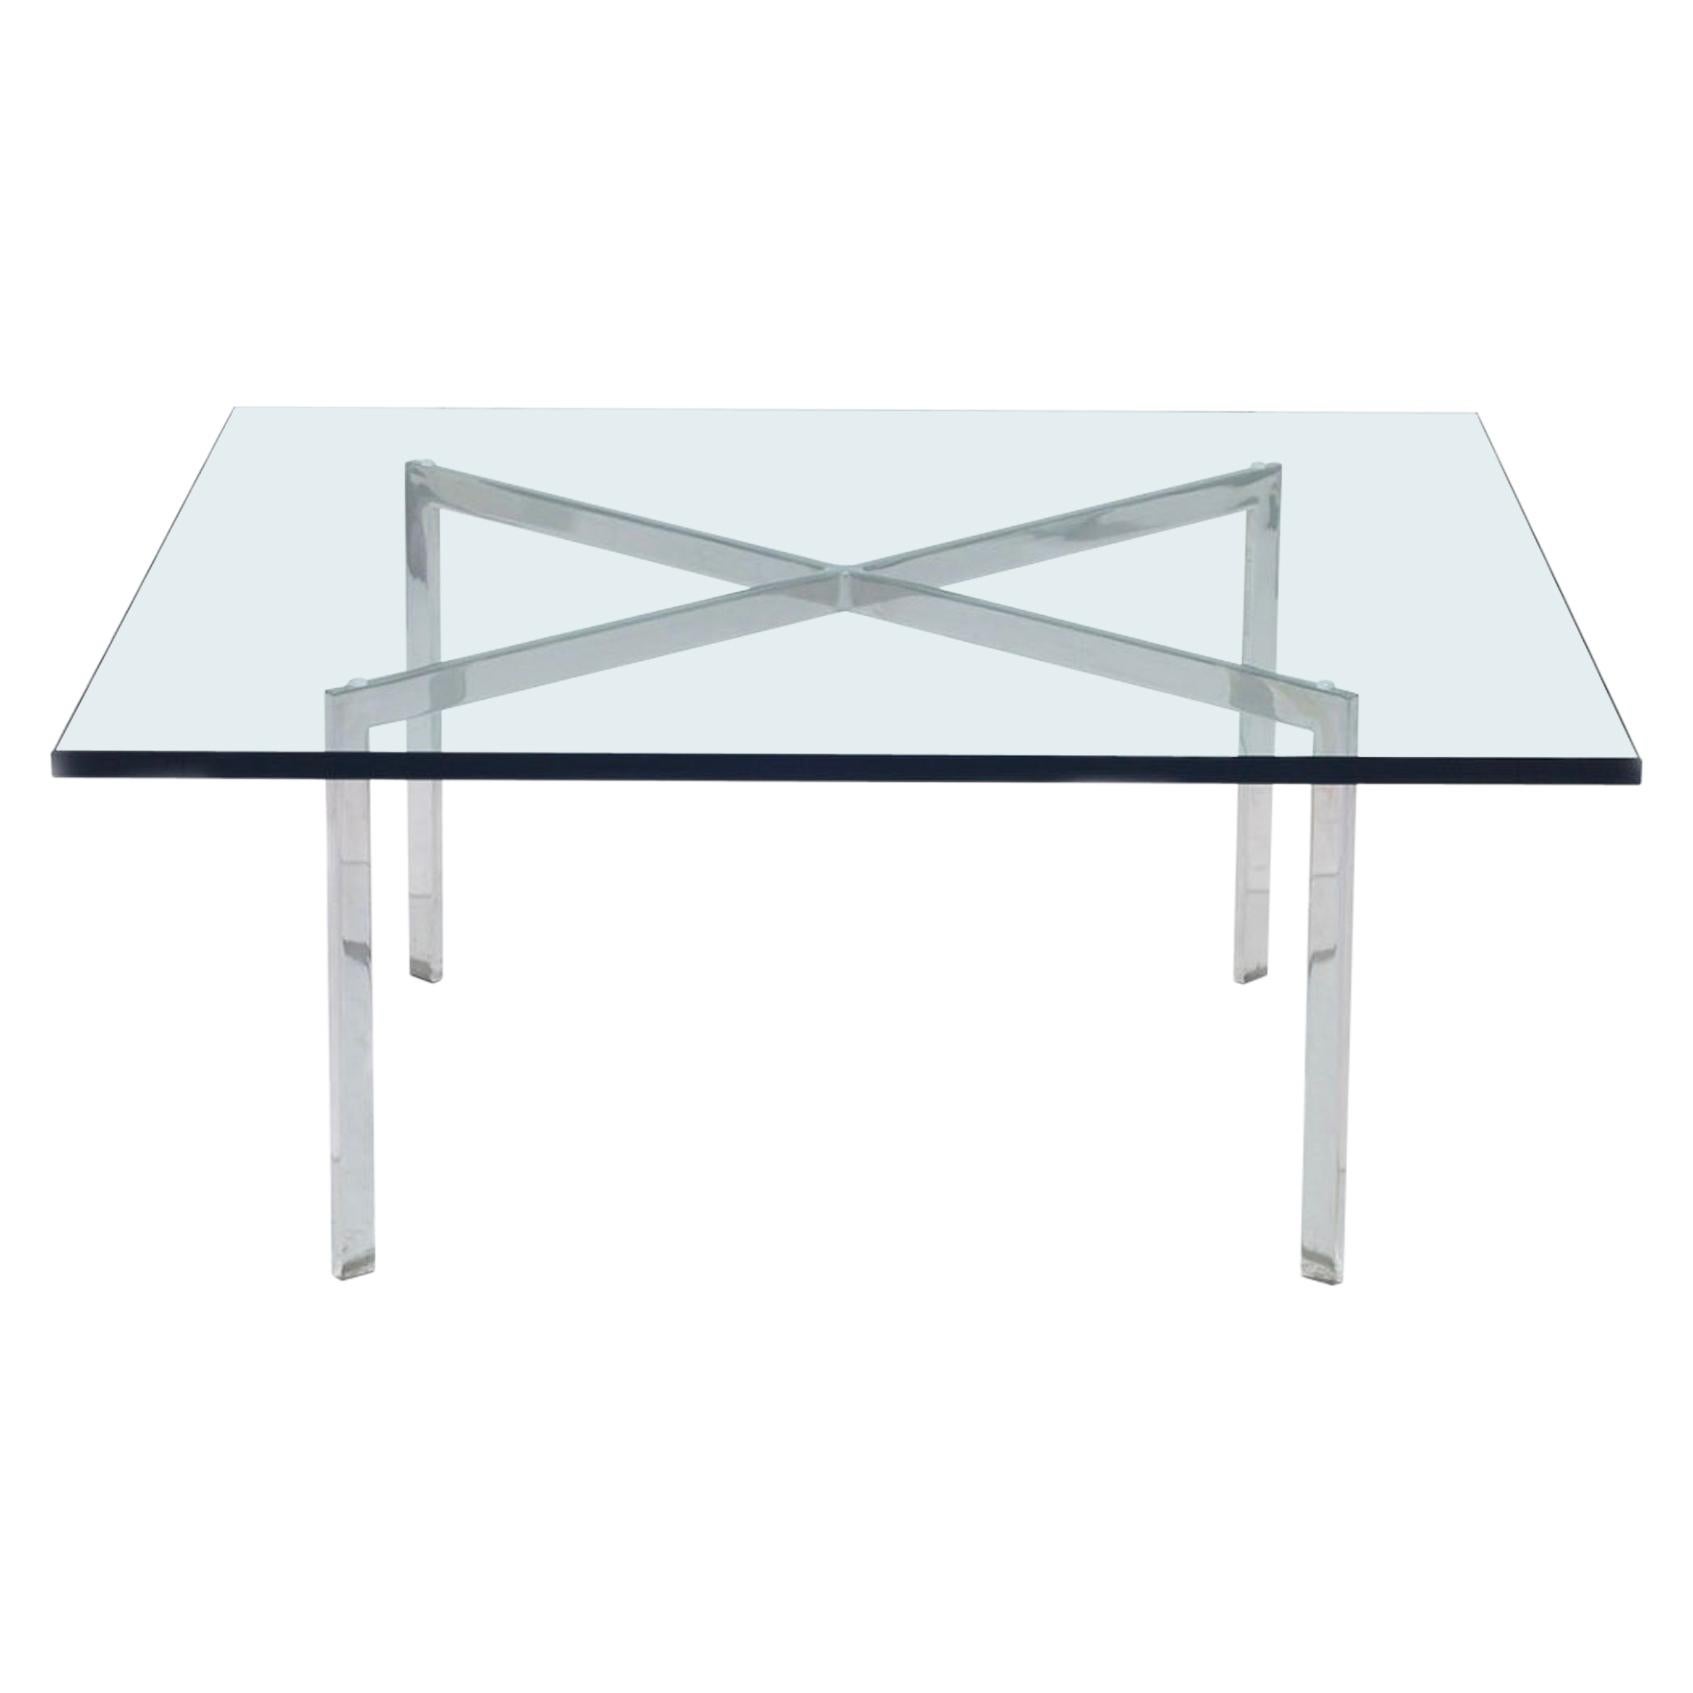 Original Barcelona Coffee Table by Mies van der Rohe for Knoll